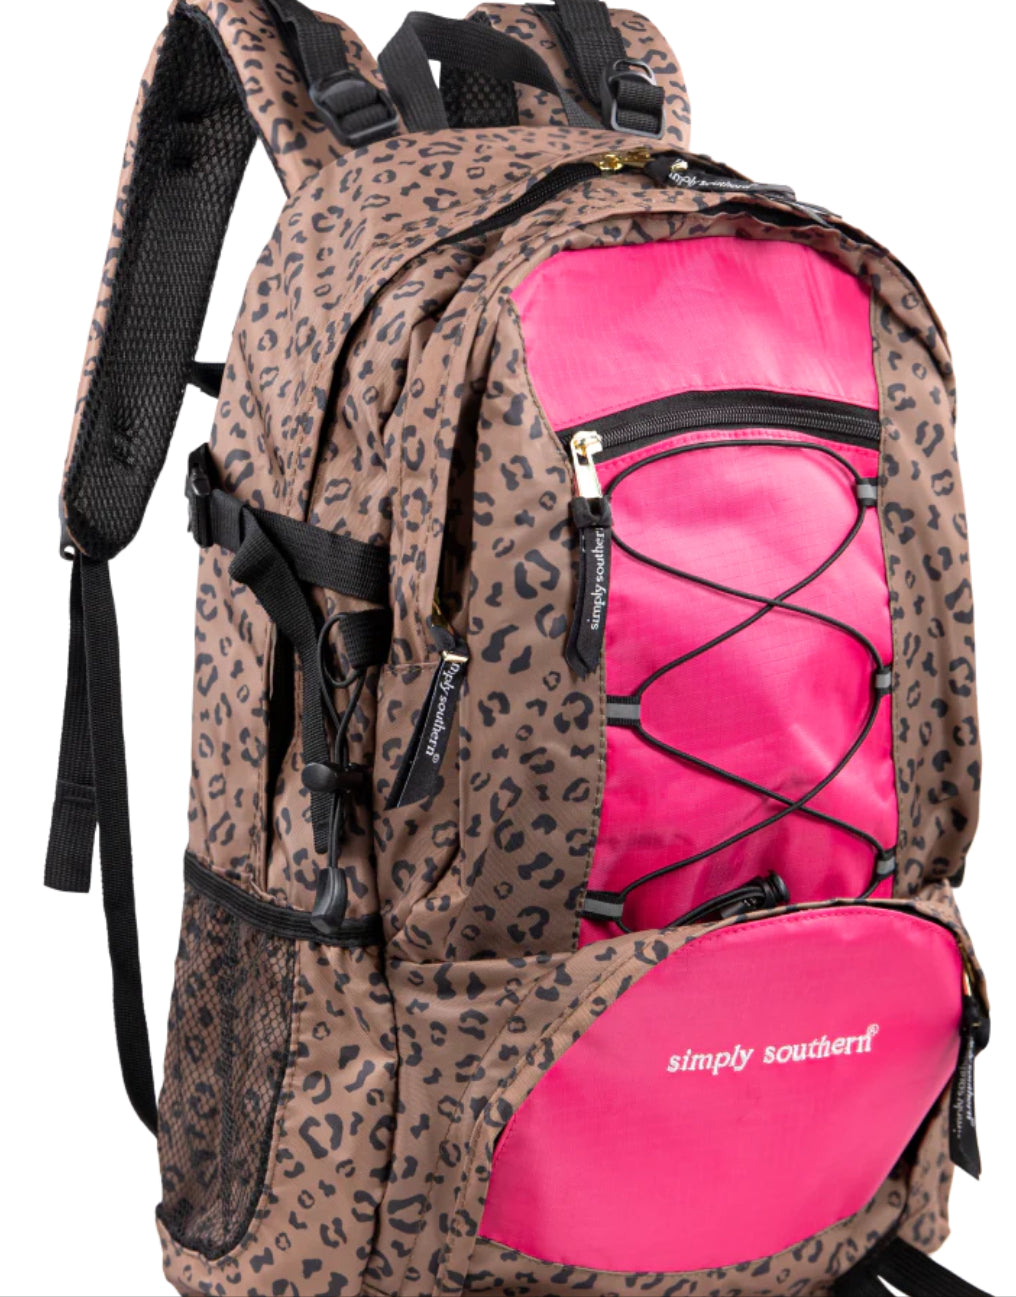 SIMPLY SOUTHERN PREPPY LEOPARD/AZTEC UTILITY BACKPACK BAG